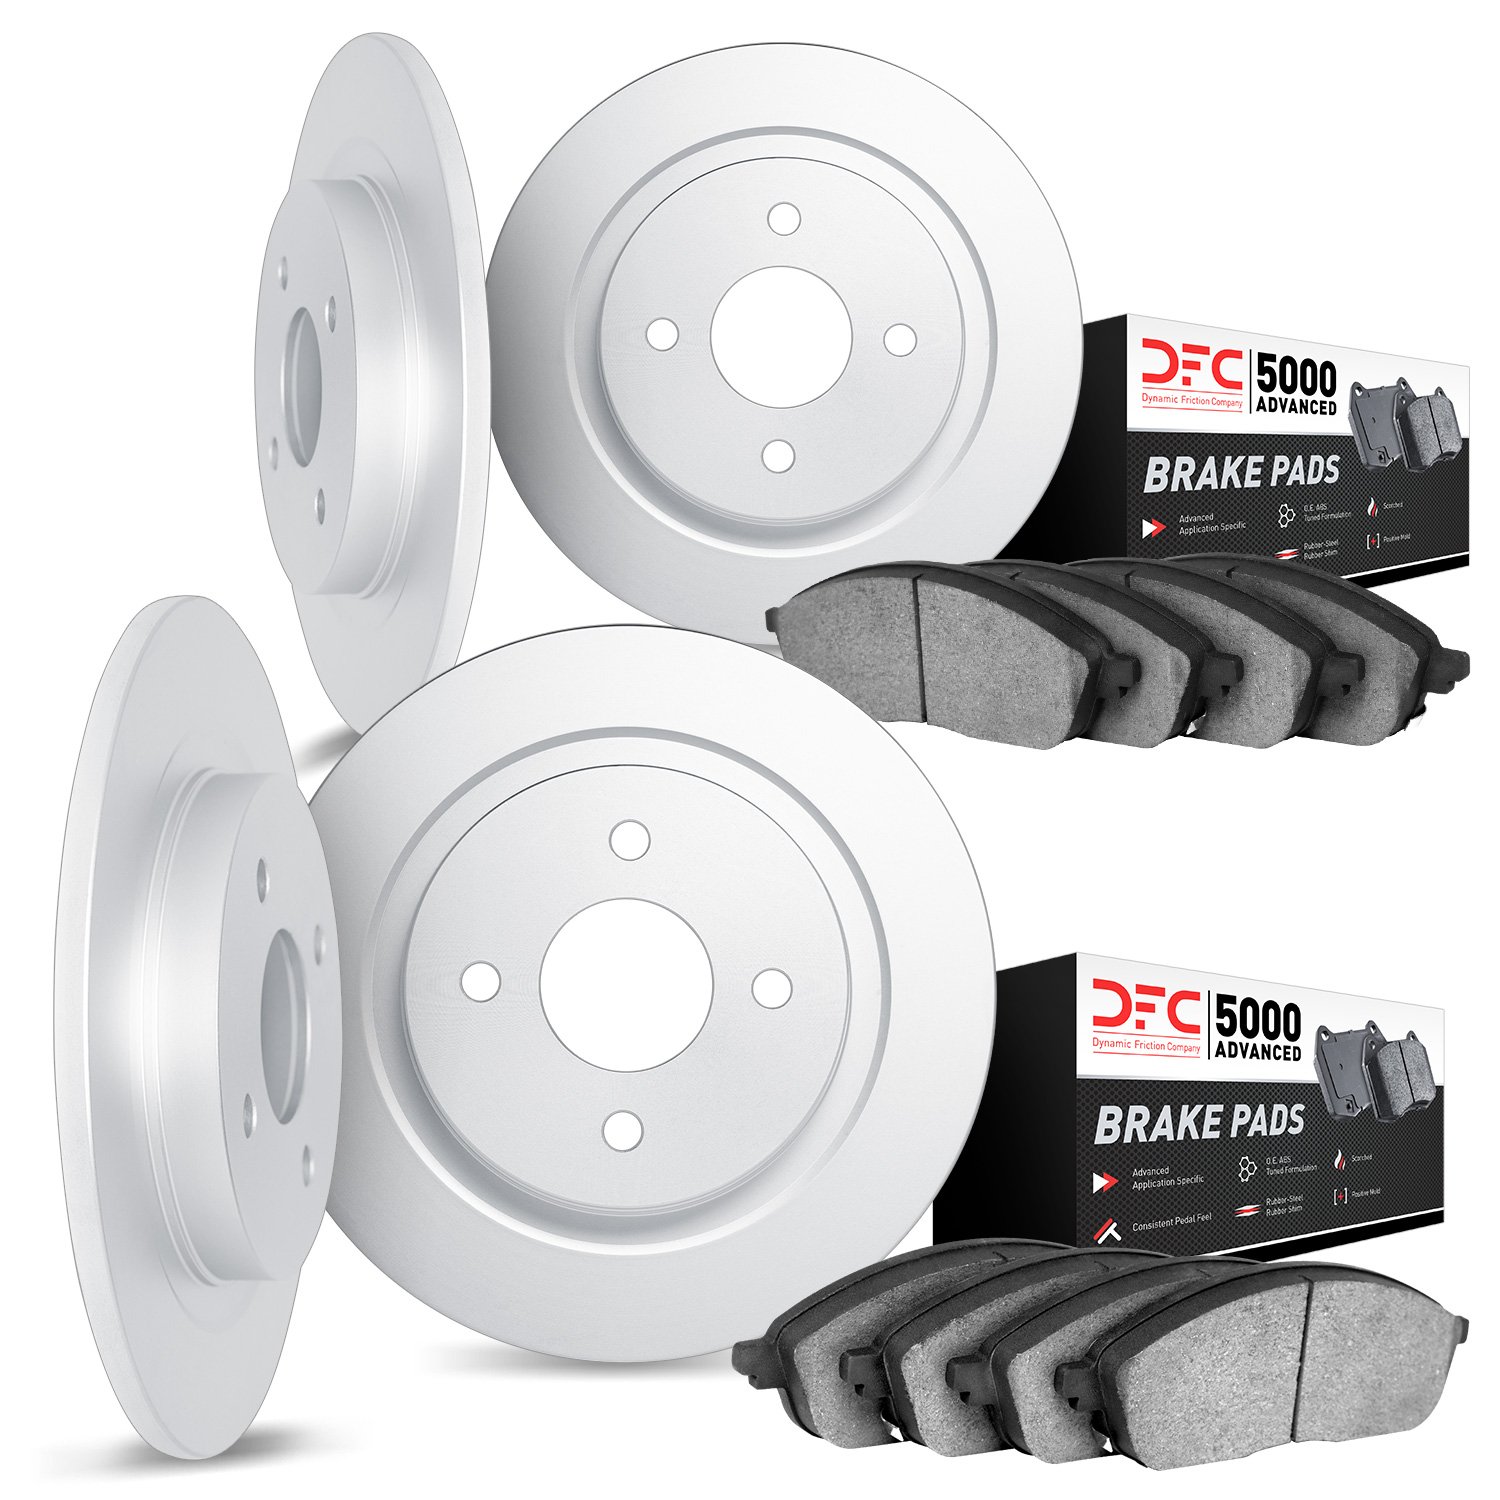 6504-28001 Brake Rotors w/5000 Advanced Brake Pads Kit, 1980-1989 Peugeot, Position: Front and Rear